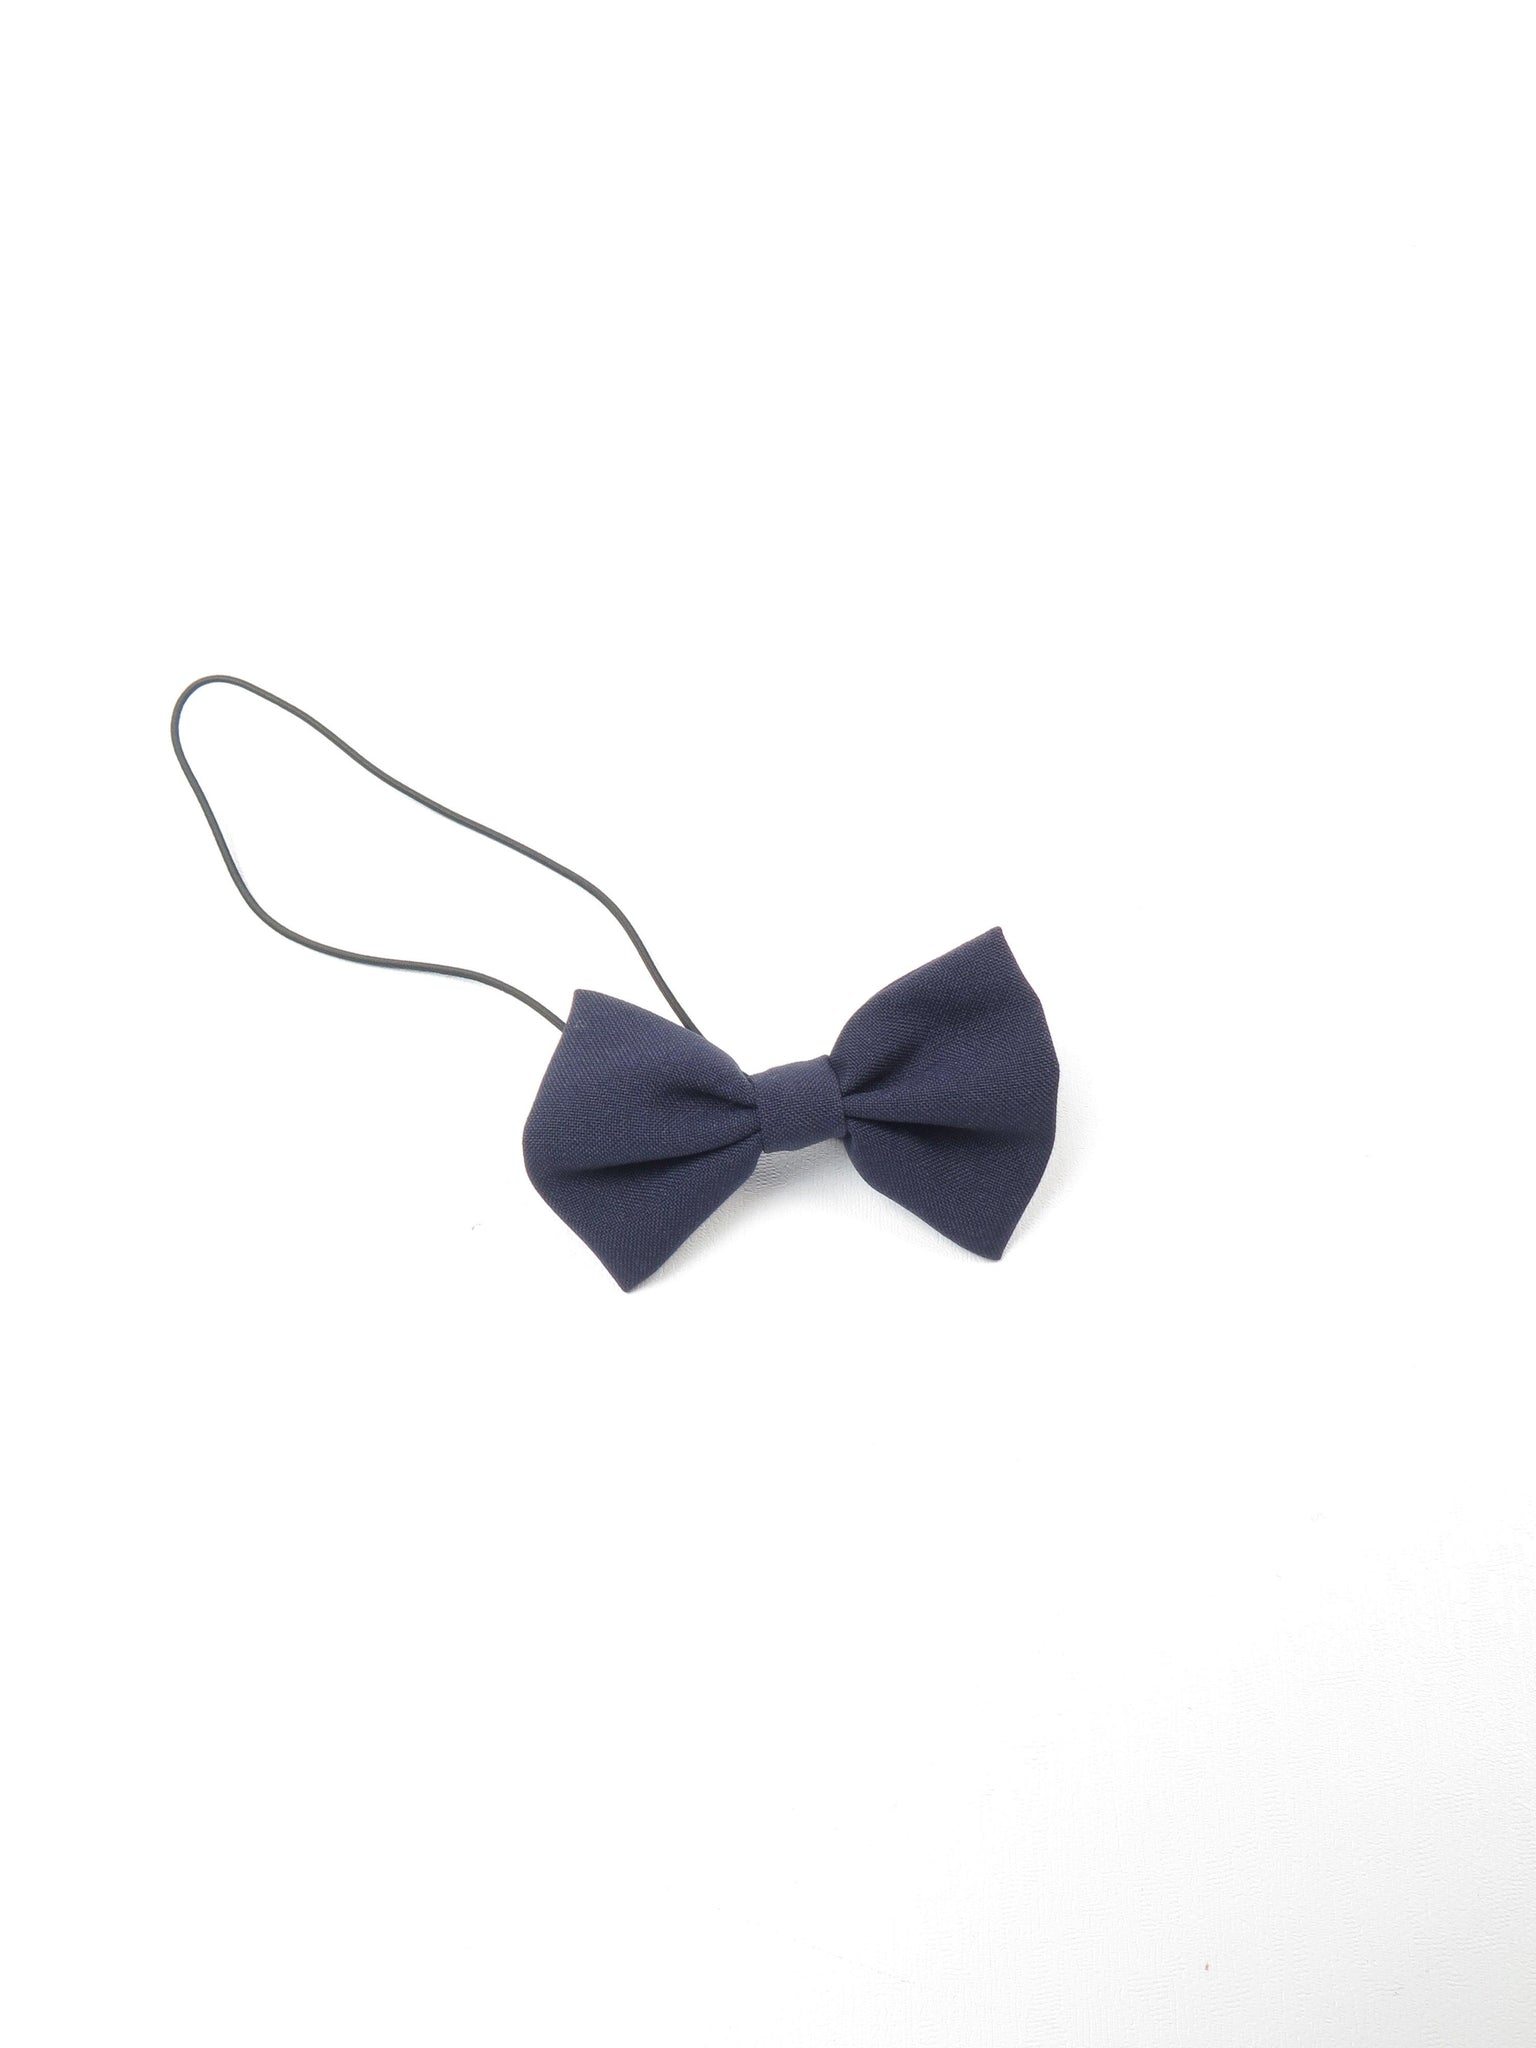 New Dickie Bow Tie On Elastic Available In Red/Burgundy /Navy - The Harlequin